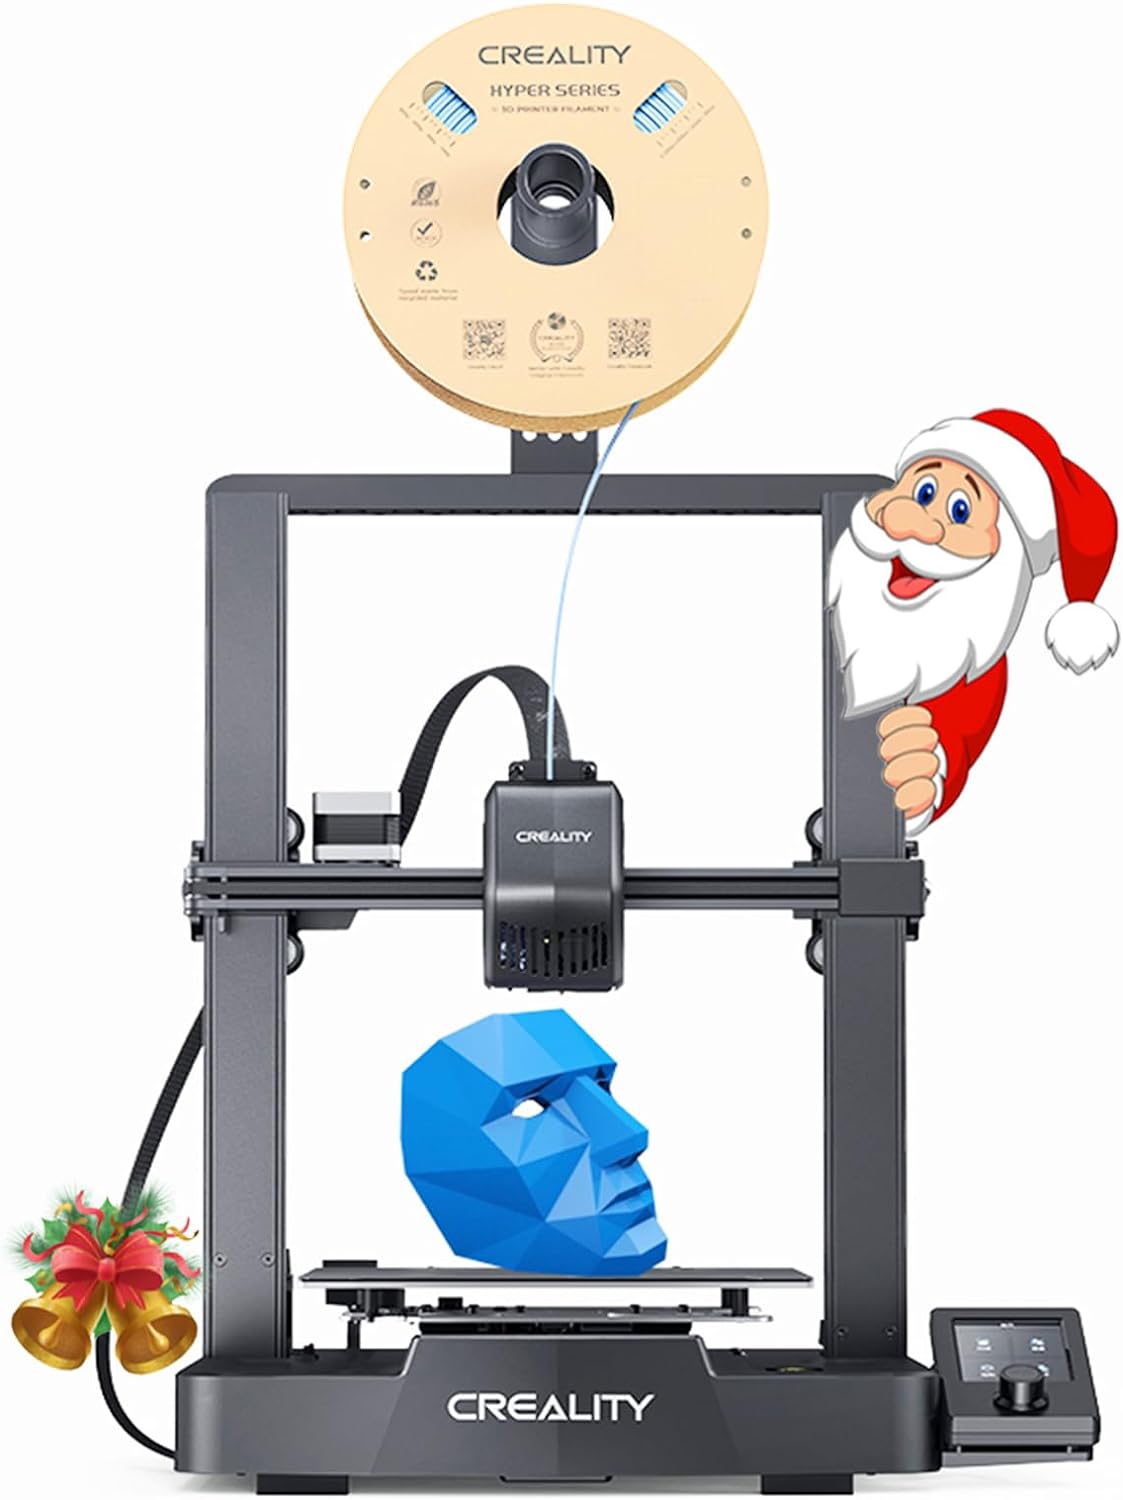 2023-creality-ender-3-v3-se-3d-printers-250mms-high-speed-printing-worry-free-auto-leveling-sprite-direct-extruder-dual- 2023 Creality Ender-3 V3 SE 3D Printer Review